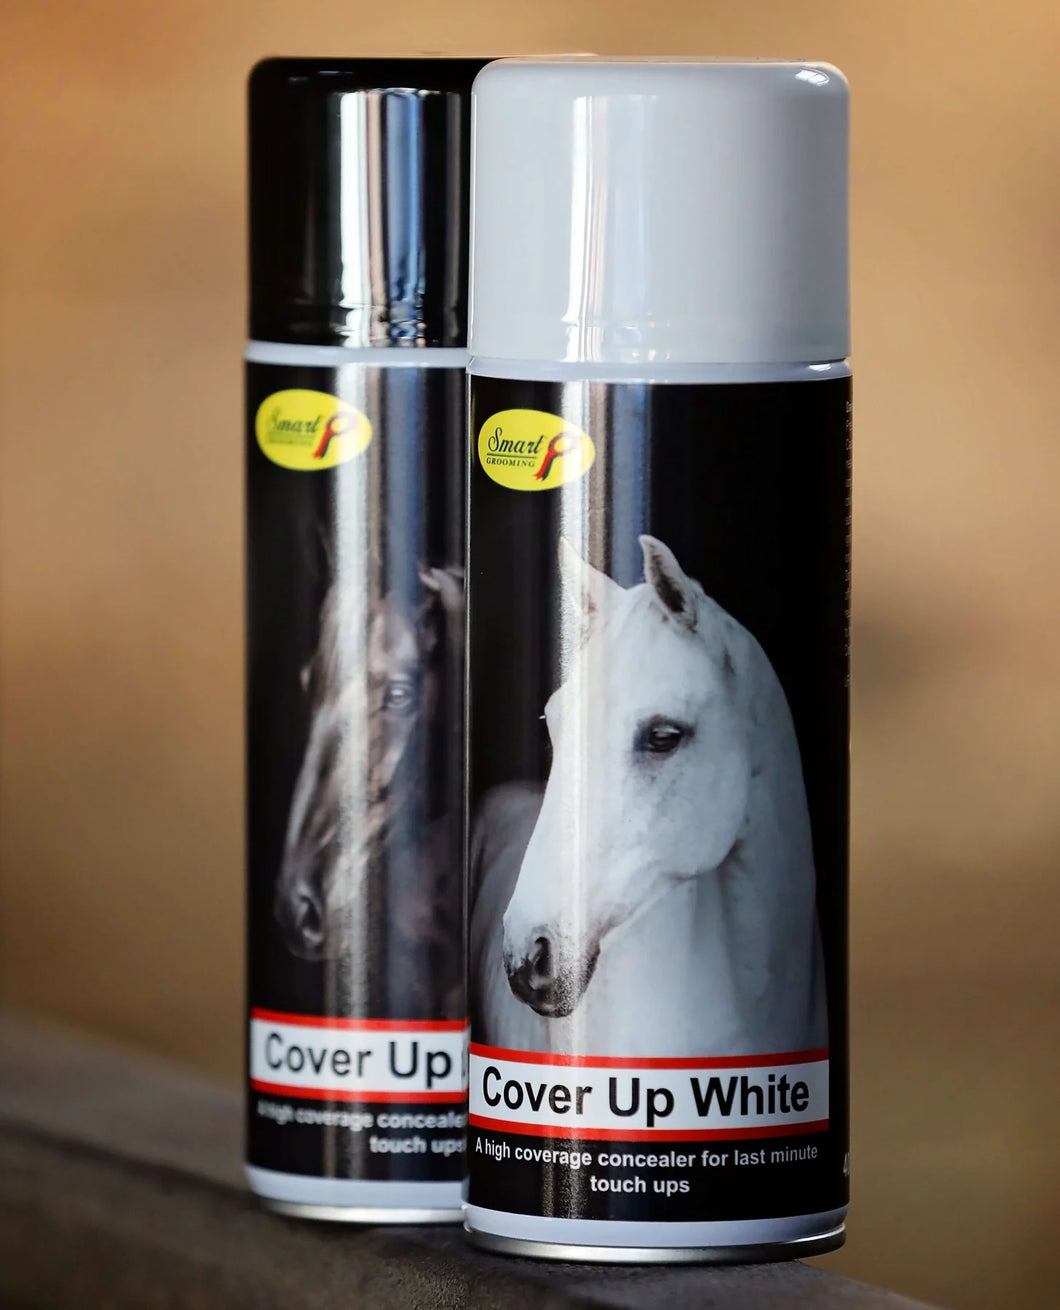 Smart Grooming Cover Up Spray White